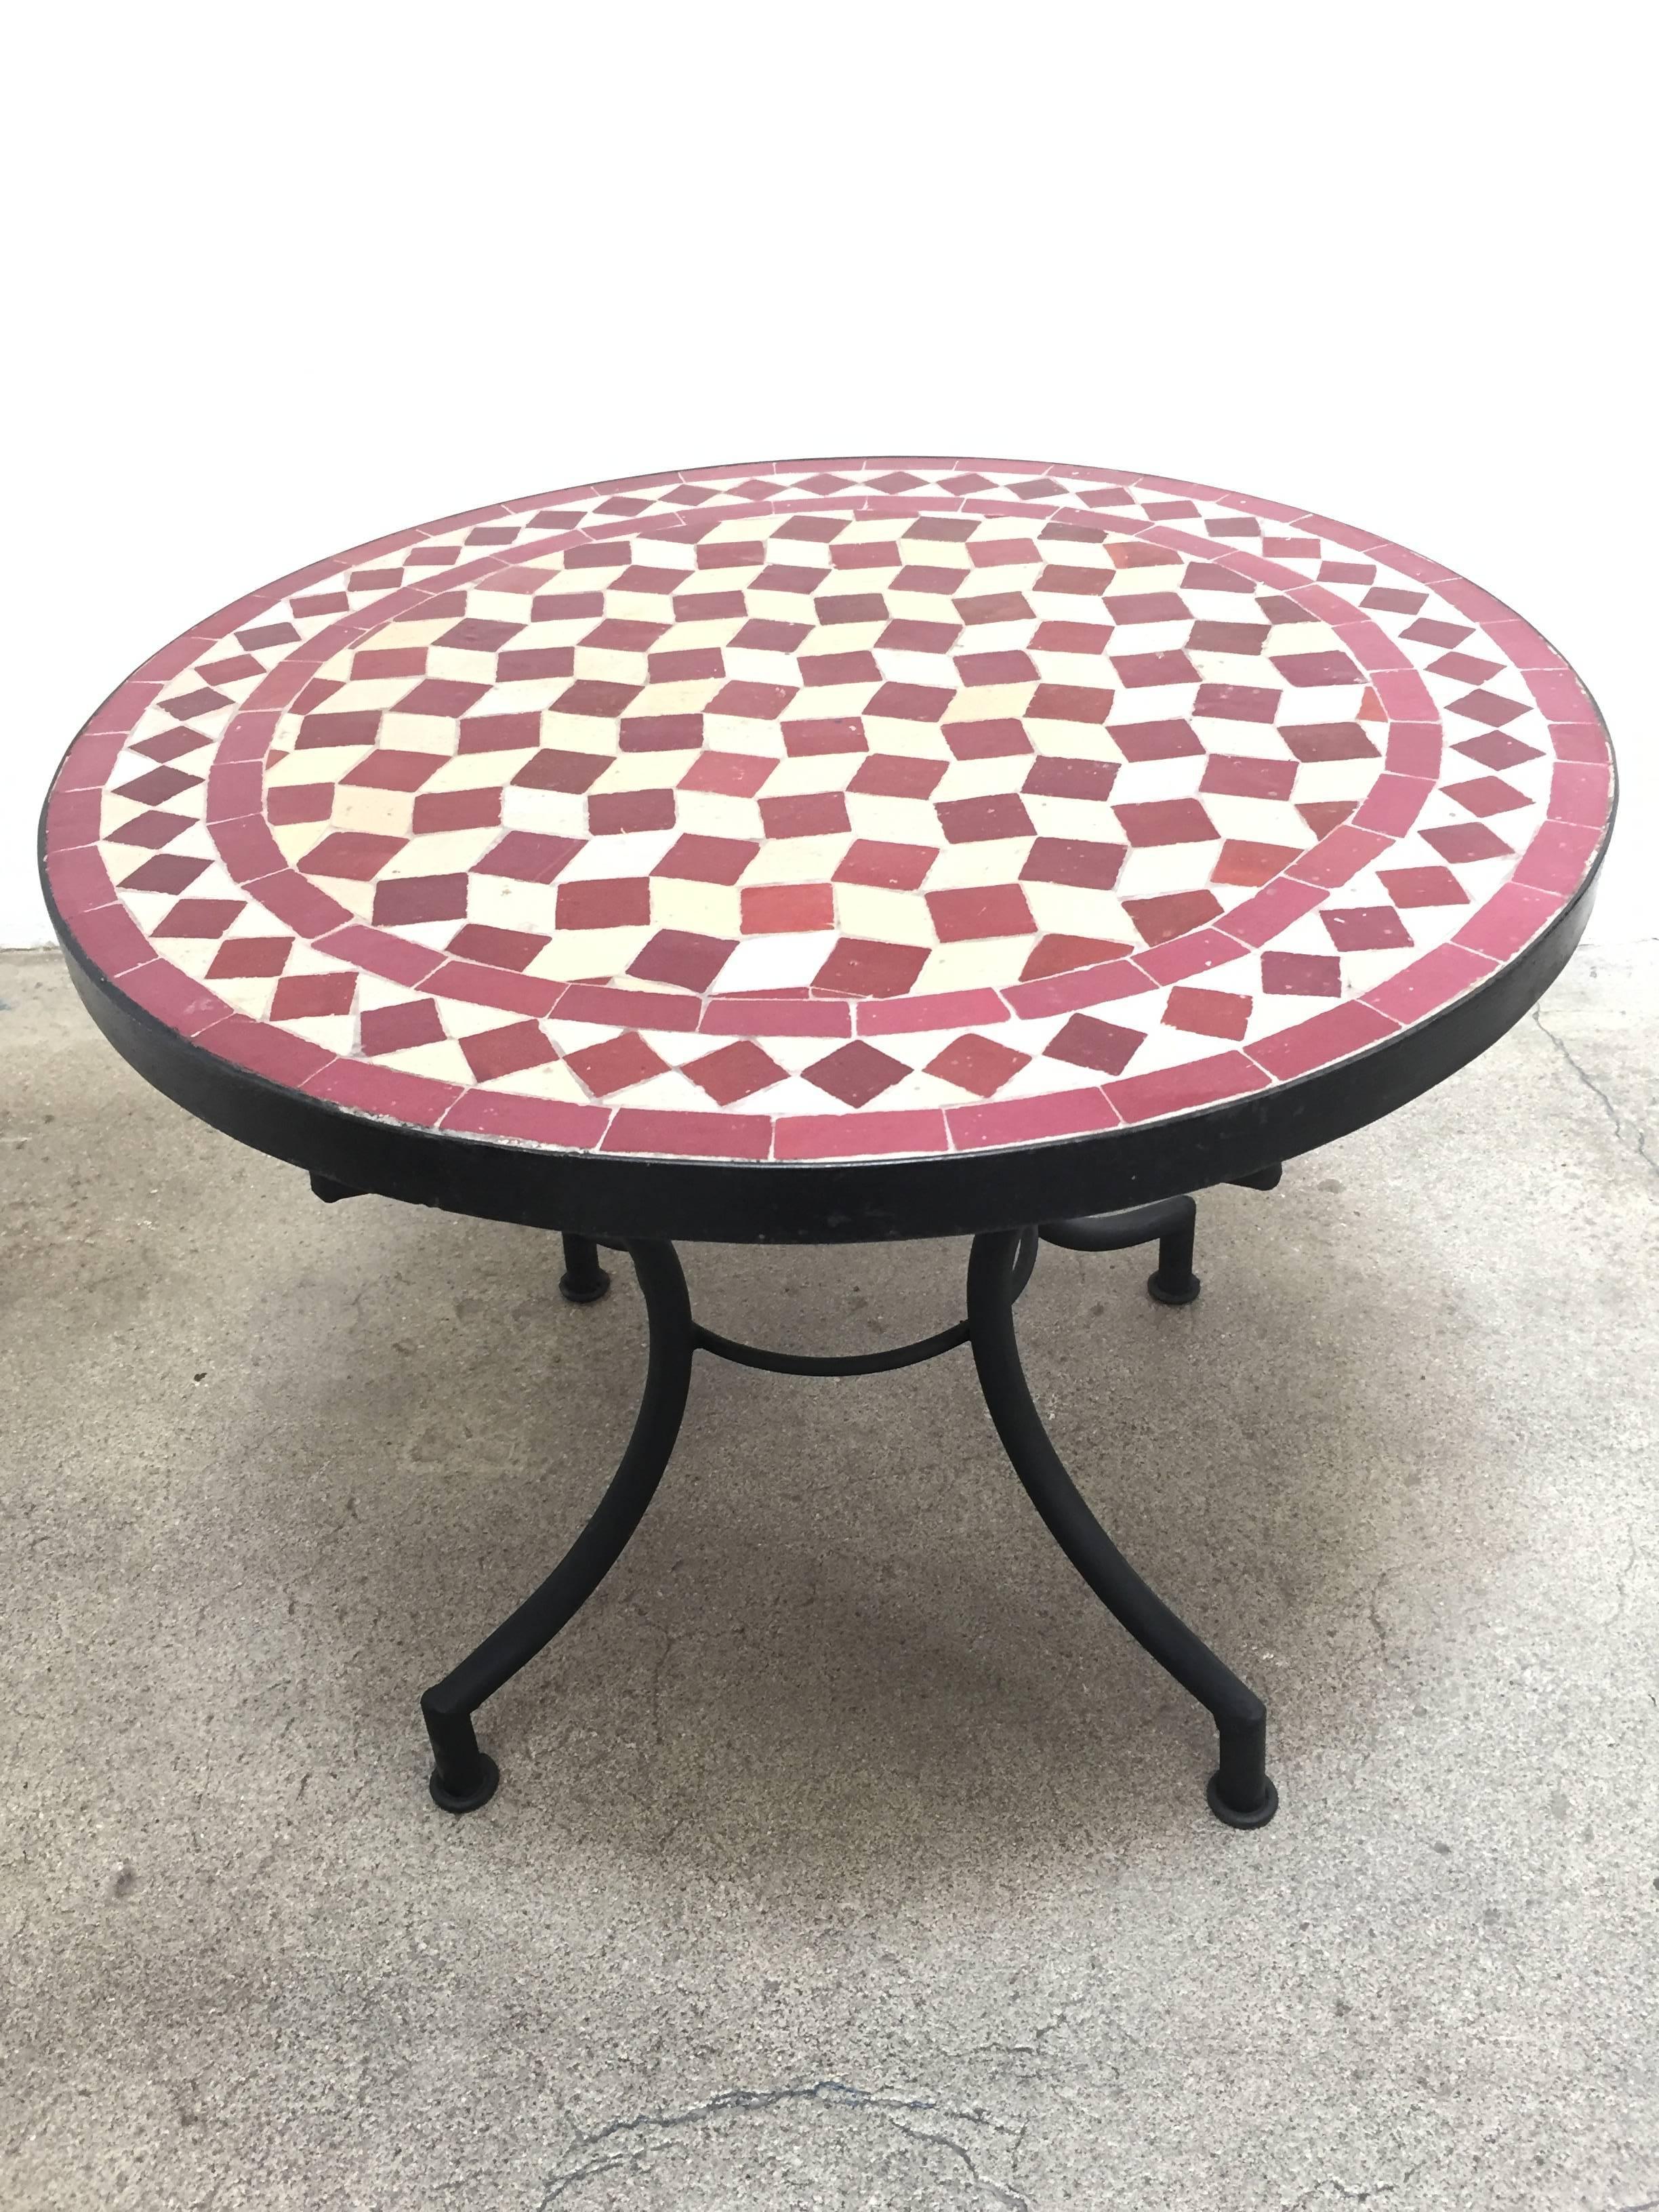 Moroccan mosaic tile table on low iron base.
Handmade by expert artisans in Fez, Morocco using reclaimed old glazed tiles inlaid in concrete and making beautiful geometrical designs, colors are burgundy and tan.
These tables could be used indoor or